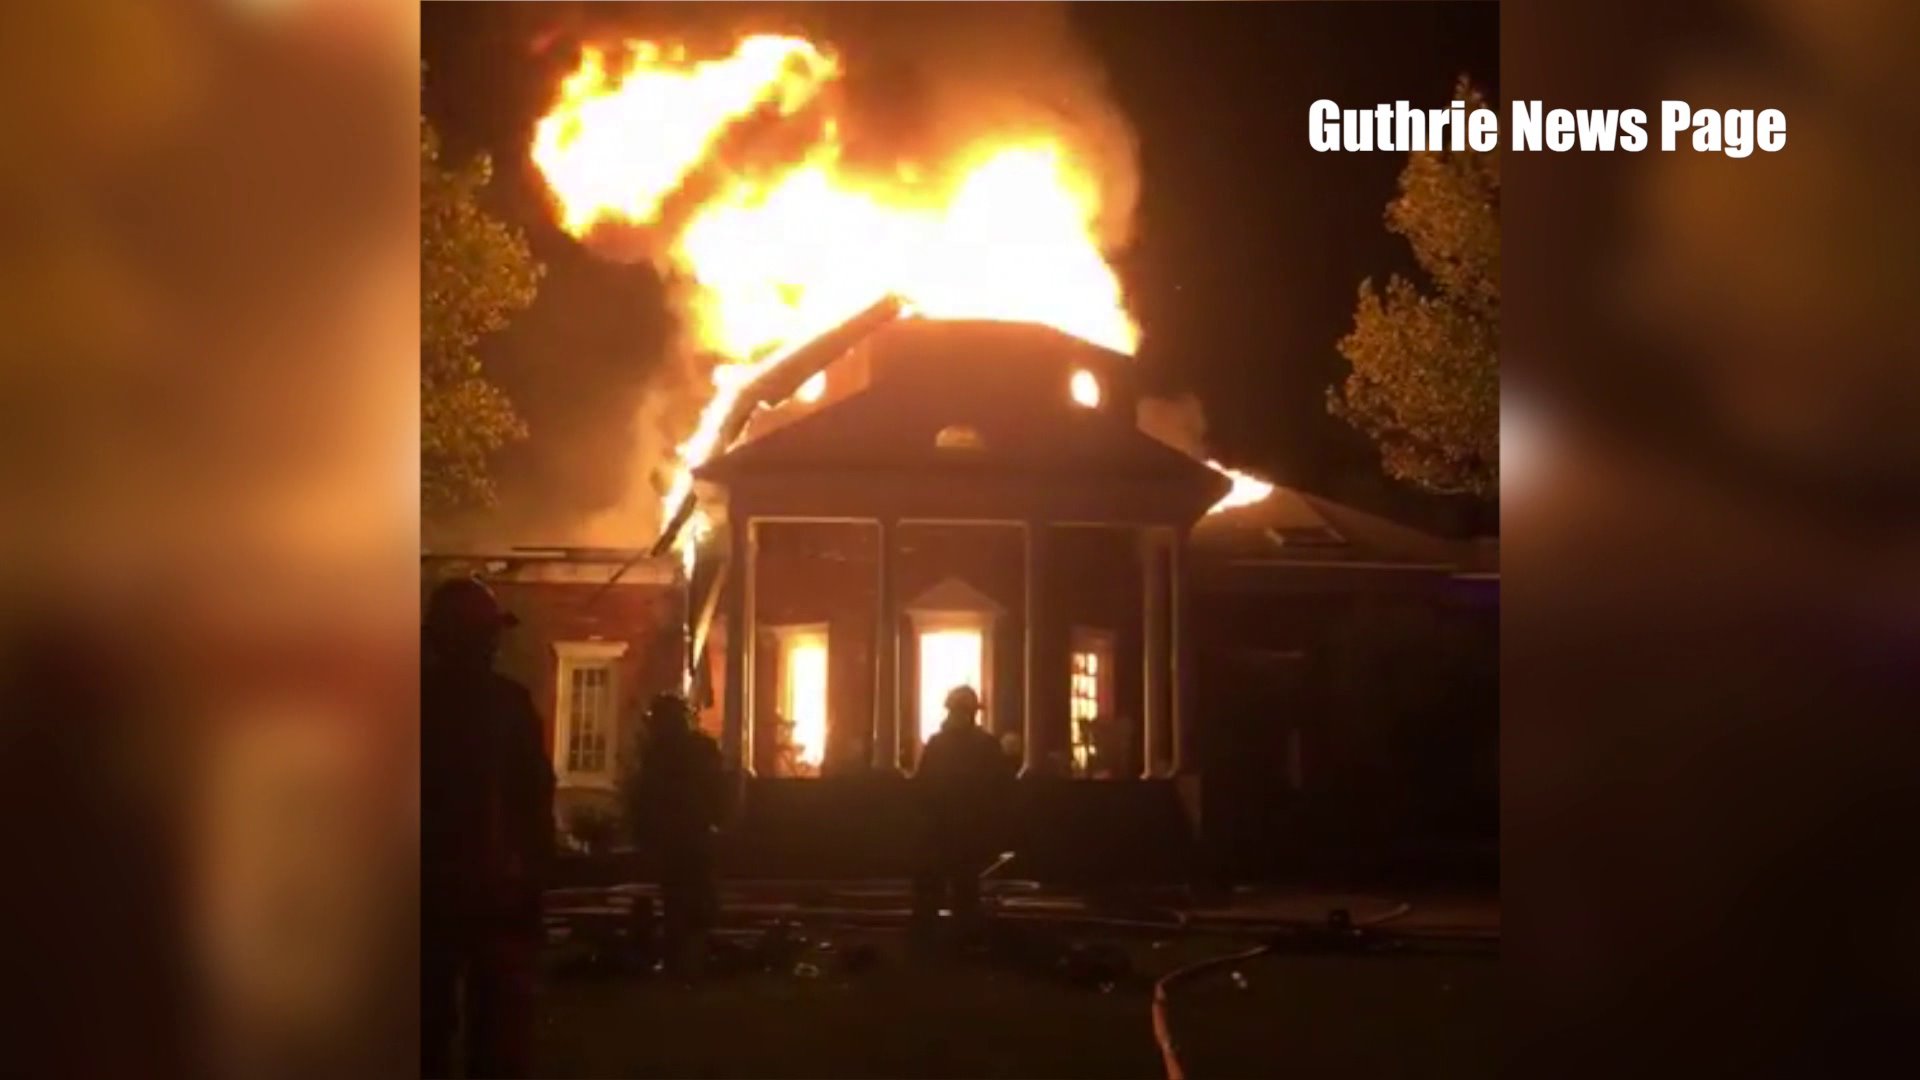 Home in Guthrie caught fire late Sunday. Photo: Guthrie News Page